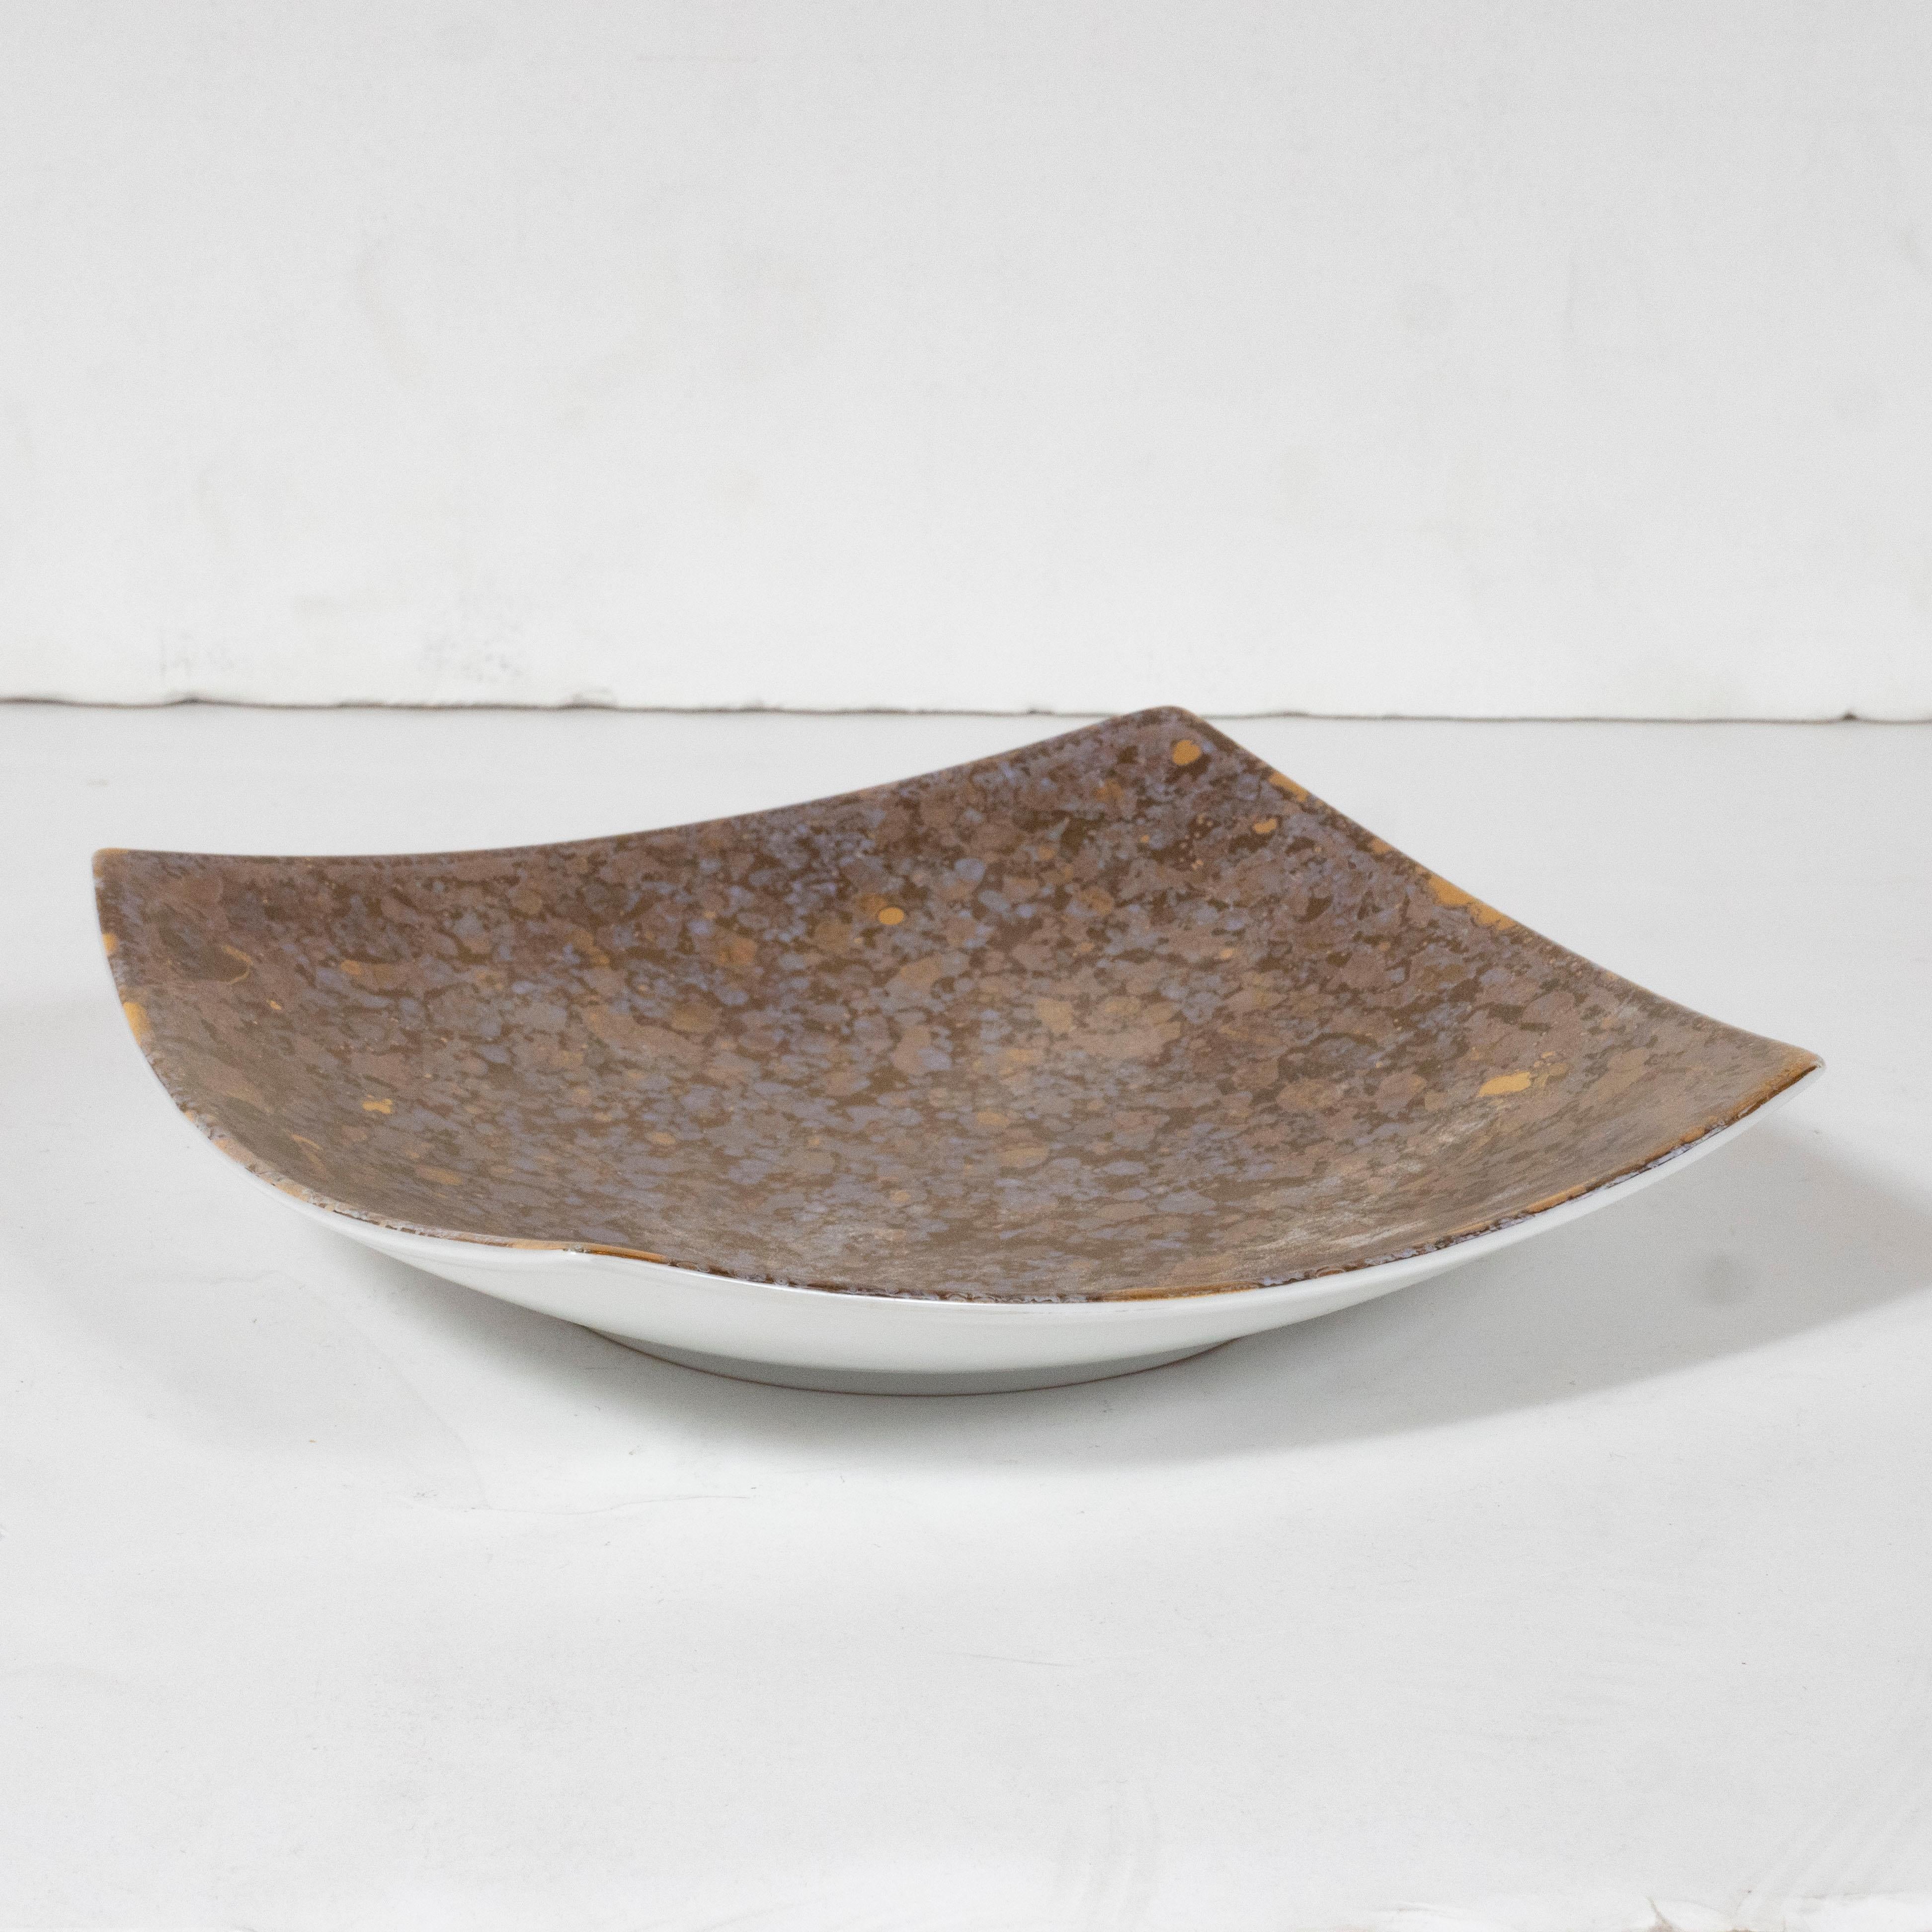 German Midcentury Speckled Bronze & White Porcelain Decorative Dish by Rosenthal For Sale